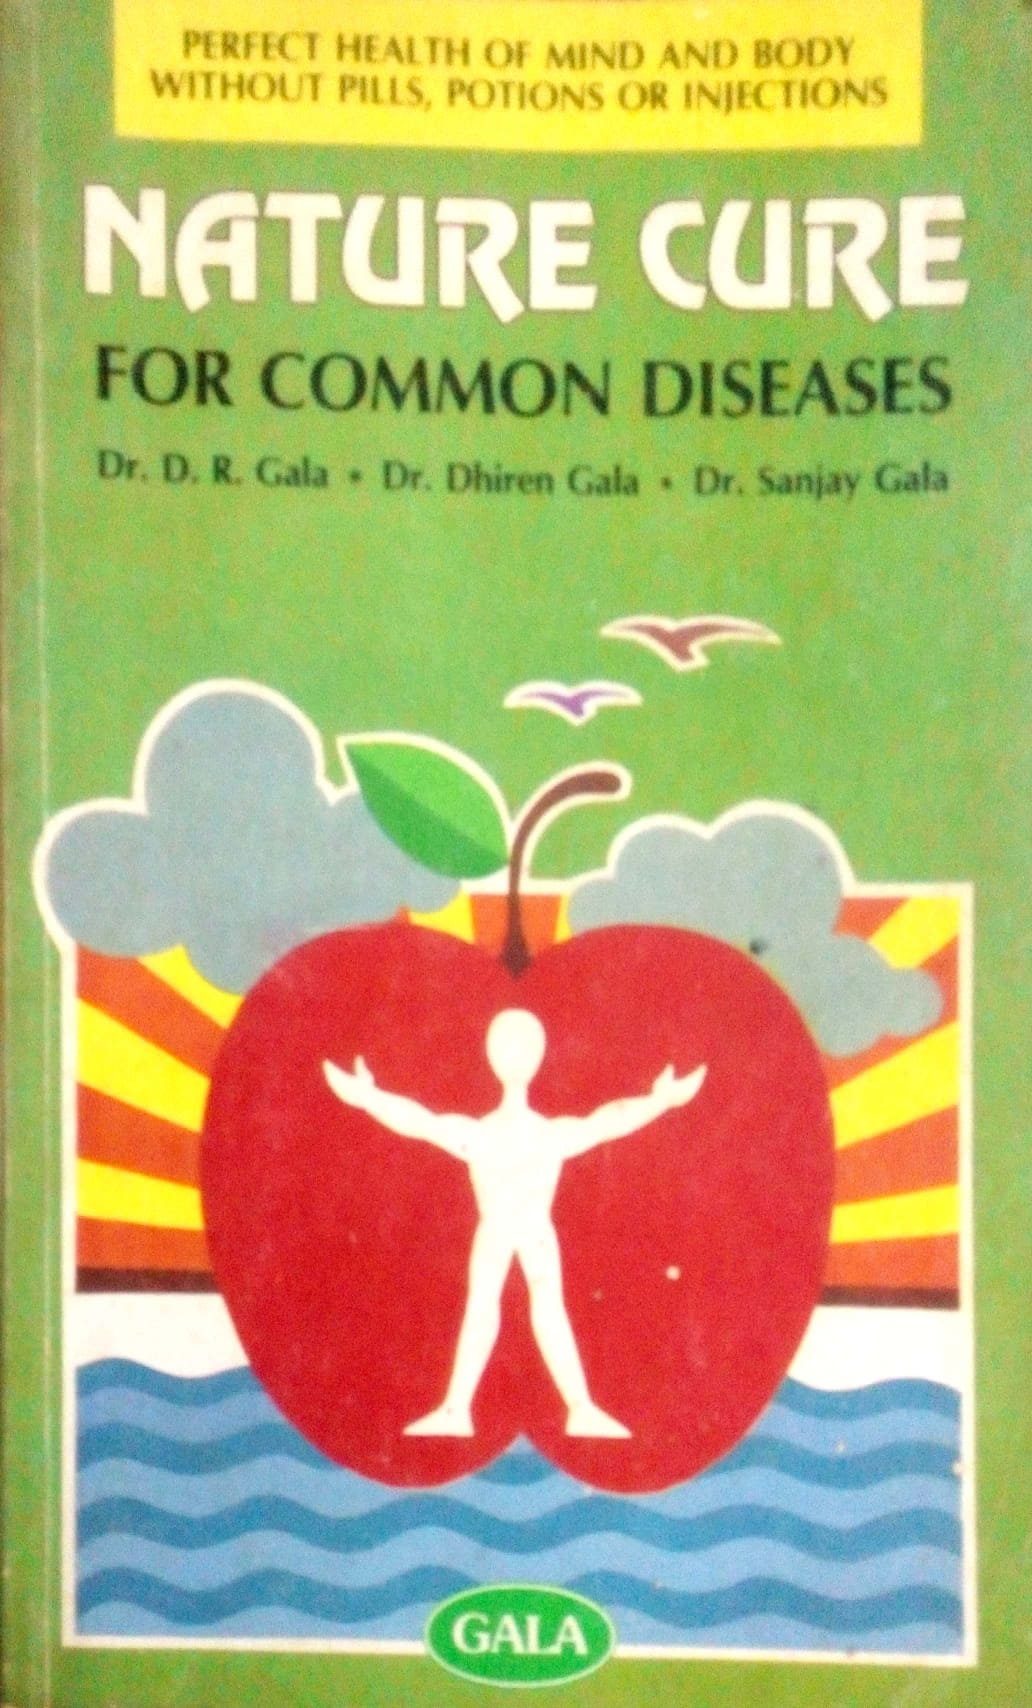 Nature cure for common diseases by Dr. D.R.Gala  Half Price Books India books inspire-bookspace.myshopify.com Half Price Books India